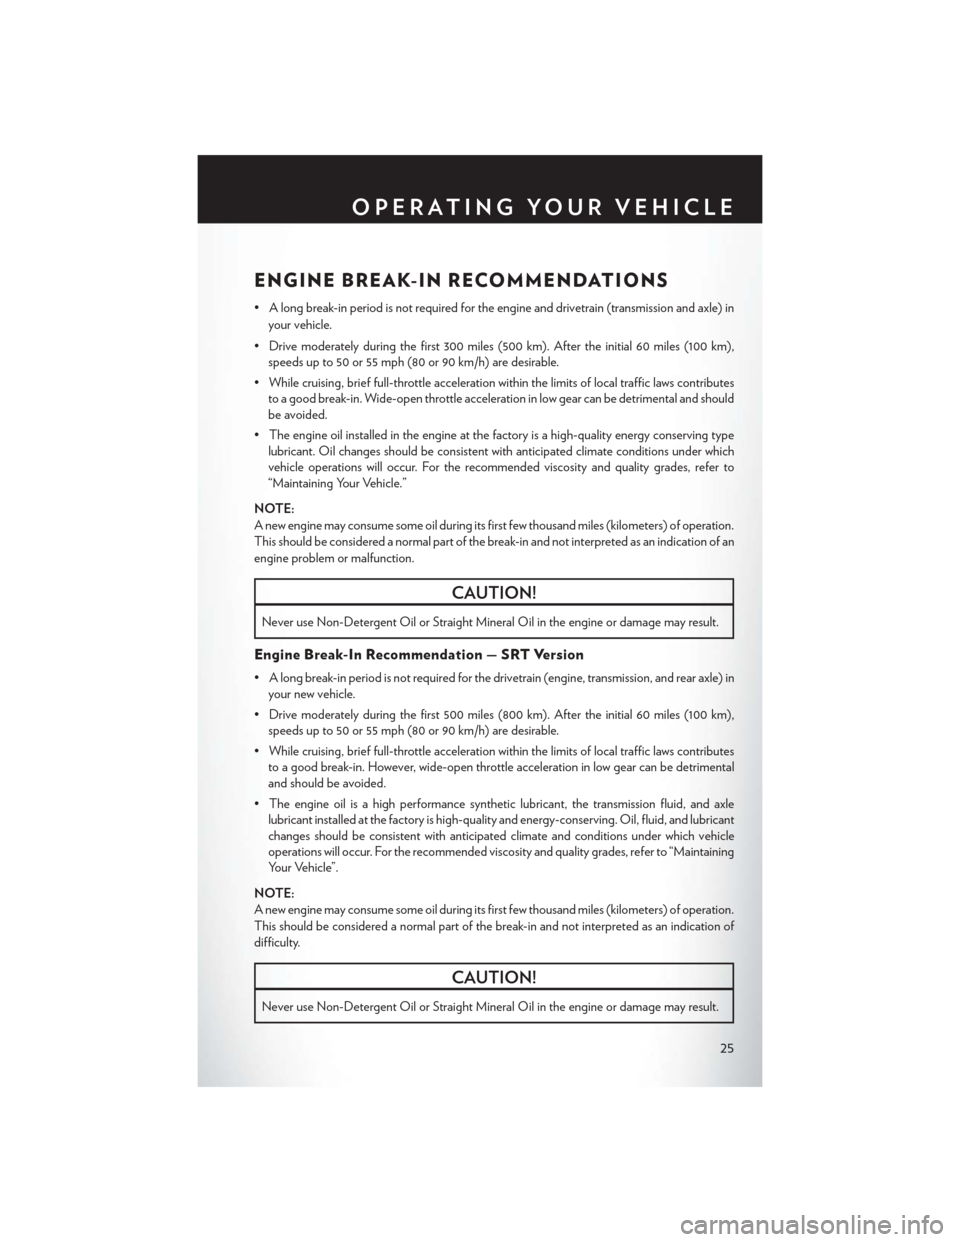 CHRYSLER 300 SRT 2014 2.G User Guide ENGINE BREAK-IN RECOMMENDATIONS
• A long break-in period is not required for the engine and drivetrain (transmission and axle) inyour vehicle.
• Drive moderately during the first 300 miles (500 km